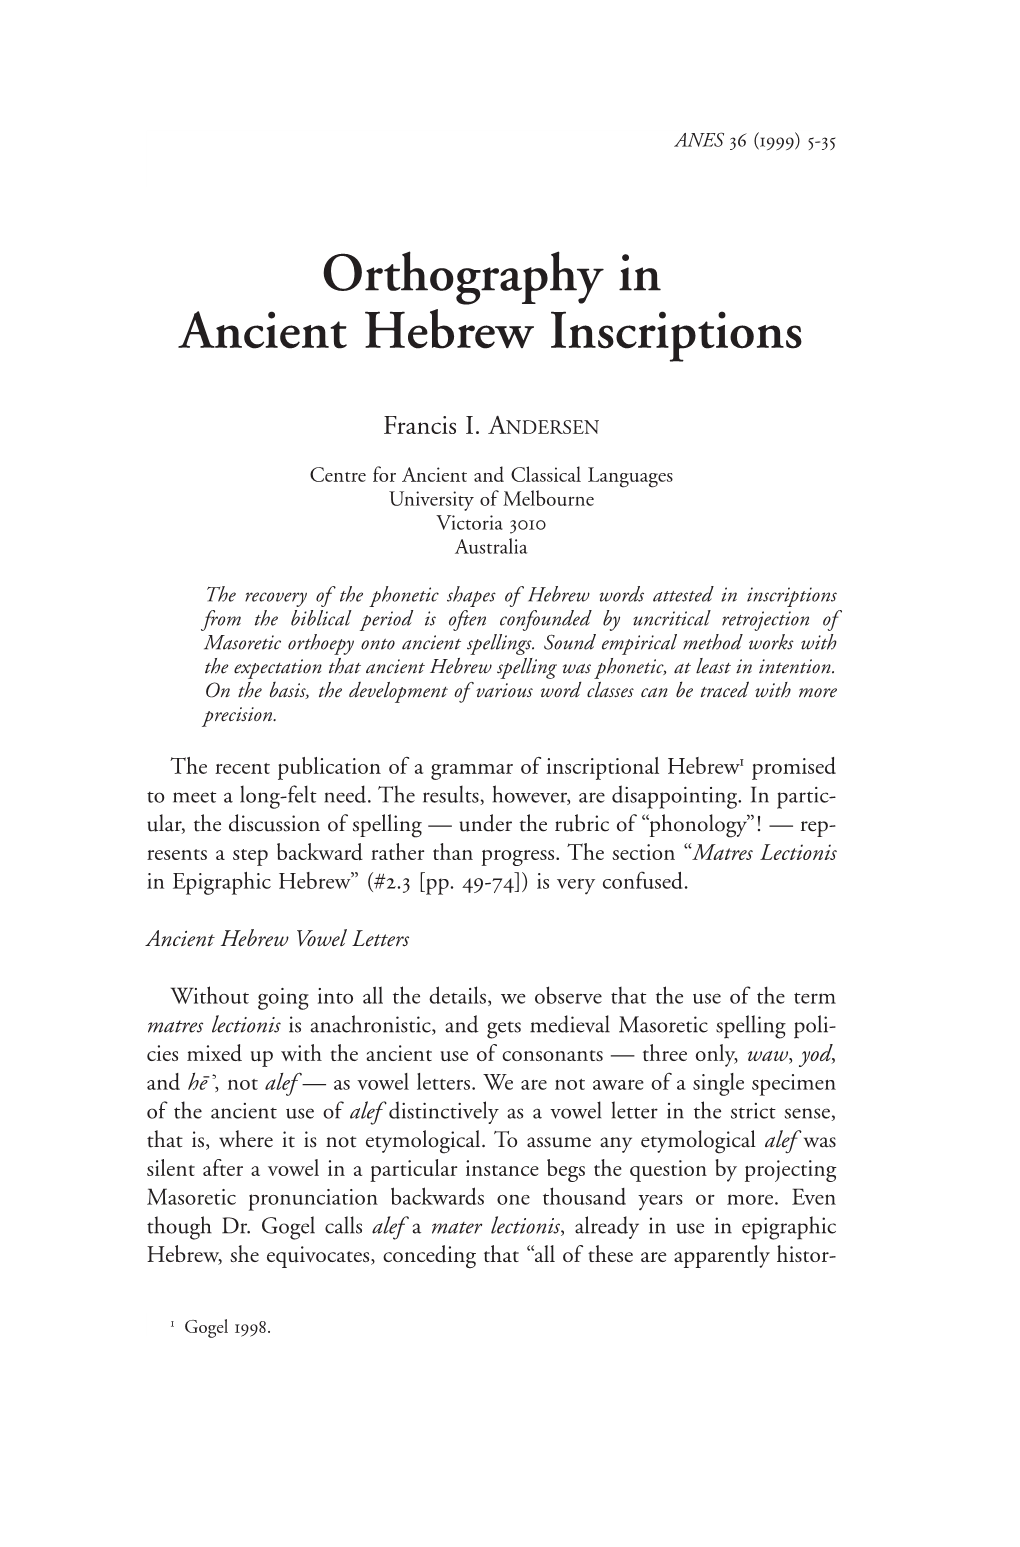 Orthography in Ancient Hebrew Inscriptions